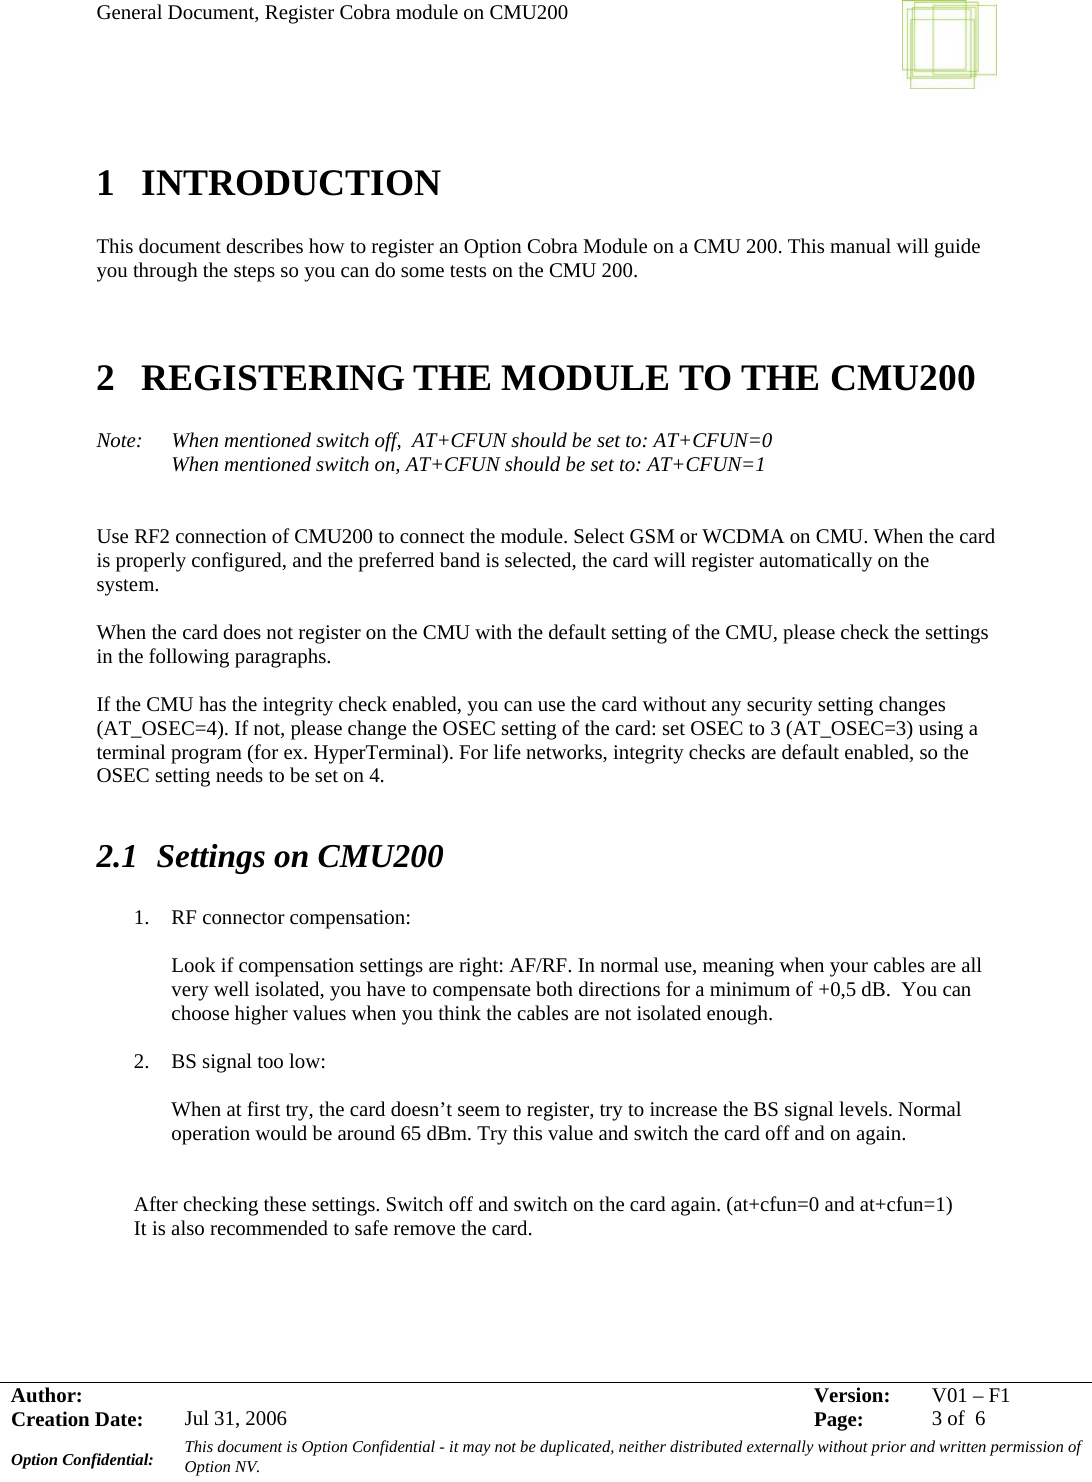 General Document, Register Cobra module on CMU200     Author:     Version:  V01 –F1Creation Date:  Jul 31, 2006    Page:  3 of  6 Option Confidential:  This document is Option Confidential - it may not be duplicated, neither distributed externally without prior and written permission of Option NV.    1 INTRODUCTION  This document describes how to register an Option Cobra Module on a CMU 200. This manual will guide you through the steps so you can do some tests on the CMU 200.   2 REGISTERING THE MODULE TO THE CMU200  Note:  When mentioned switch off,  AT+CFUN should be set to: AT+CFUN=0 When mentioned switch on, AT+CFUN should be set to: AT+CFUN=1   Use RF2 connection of CMU200 to connect the module. Select GSM or WCDMA on CMU. When the card is properly configured, and the preferred band is selected, the card will register automatically on the system.  When the card does not register on the CMU with the default setting of the CMU, please check the settings in the following paragraphs.  If the CMU has the integrity check enabled, you can use the card without any security setting changes (AT_OSEC=4). If not, please change the OSEC setting of the card: set OSEC to 3 (AT_OSEC=3) using a terminal program (for ex. HyperTerminal). For life networks, integrity checks are default enabled, so the OSEC setting needs to be set on 4.  2.1 Settings on CMU200  1. RF connector compensation:   Look if compensation settings are right: AF/RF. In normal use, meaning when your cables are all very well isolated, you have to compensate both directions for a minimum of +0,5 dB.  You can choose higher values when you think the cables are not isolated enough.  2. BS signal too low:  When at first try, the card doesn’t seem to register, try to increase the BS signal levels. Normal operation would be around 65 dBm. Try this value and switch the card off and on again.    After checking these settings. Switch off and switch on the card again. (at+cfun=0 and at+cfun=1)  It is also recommended to safe remove the card.    